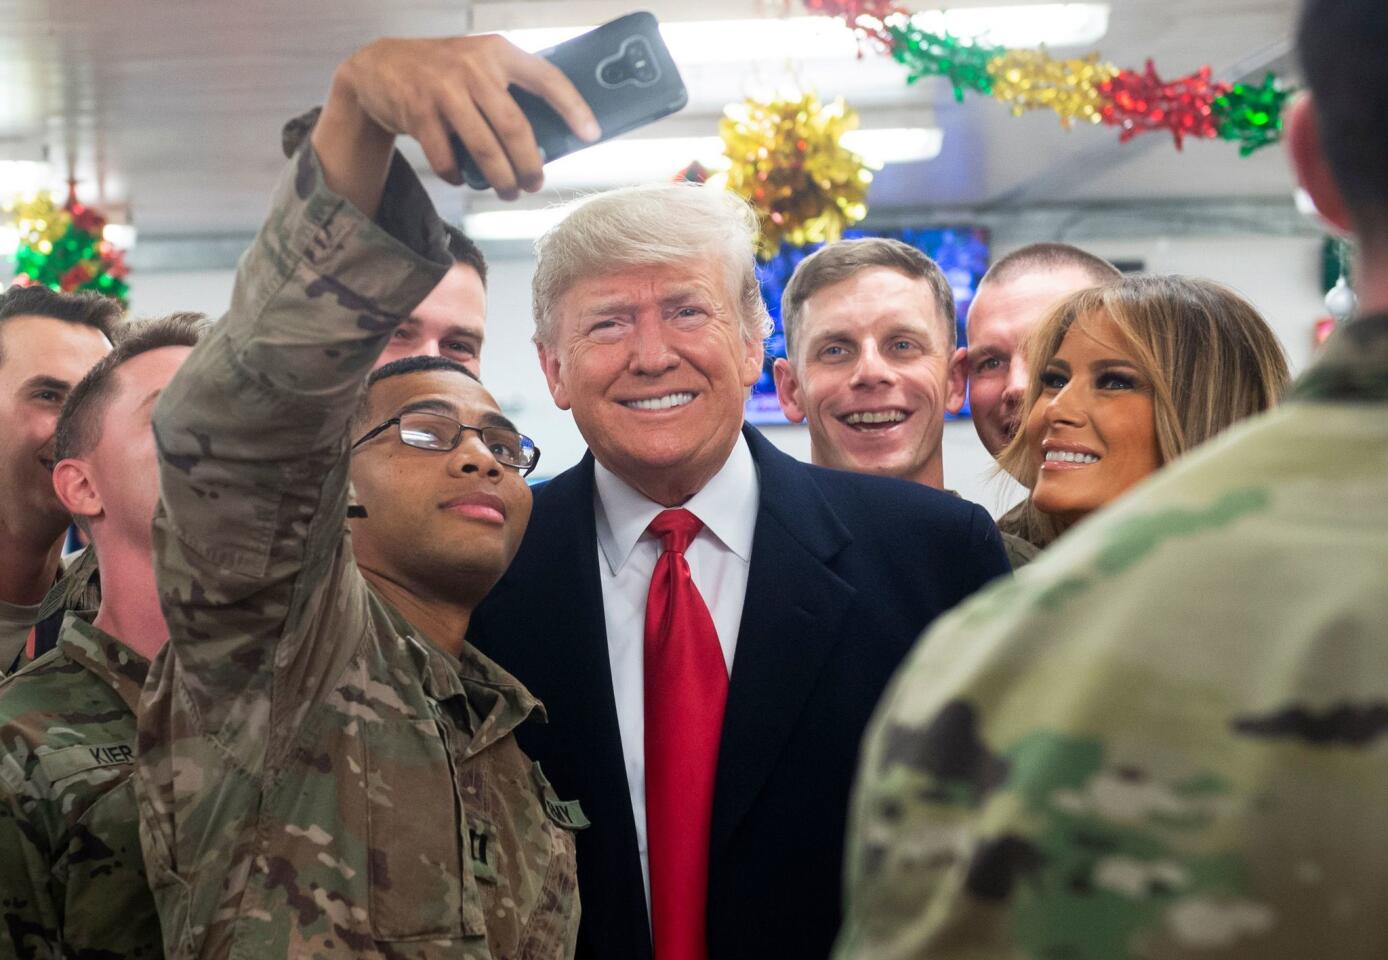 President Trump and First Lady Melania Trump greet members of the U.S. military in Iraq.